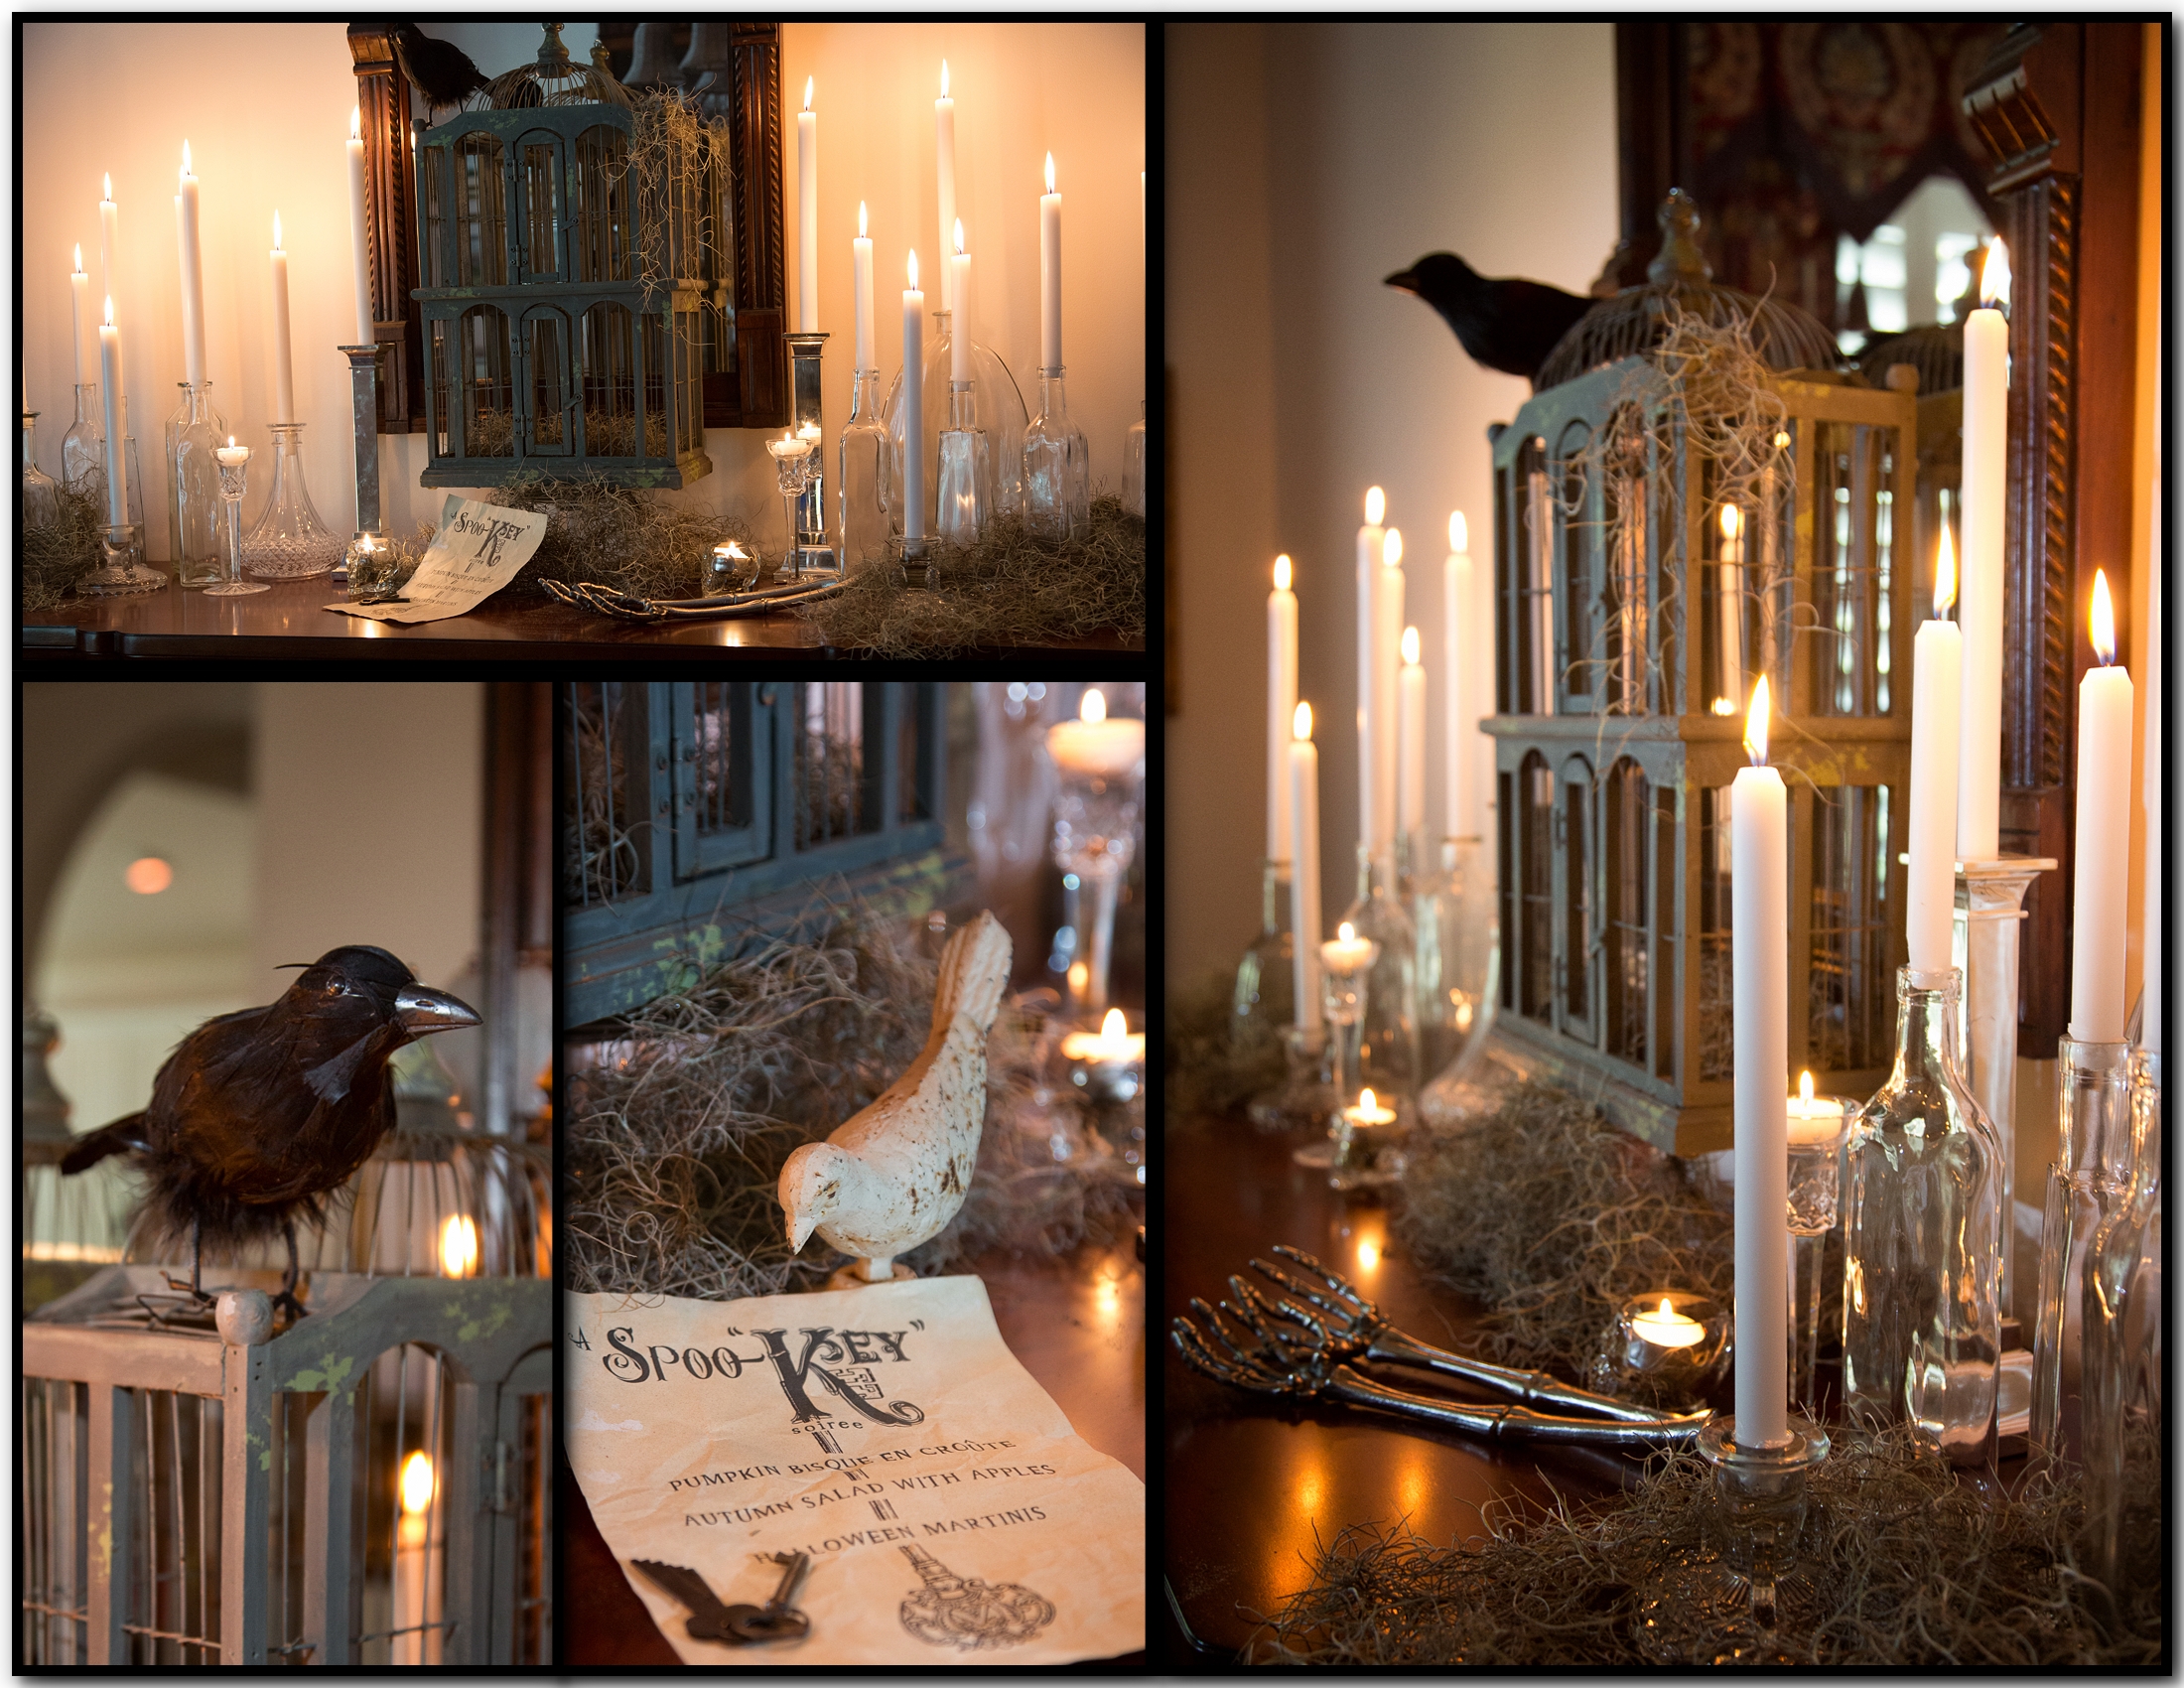 Tablescape by Plum Productions!